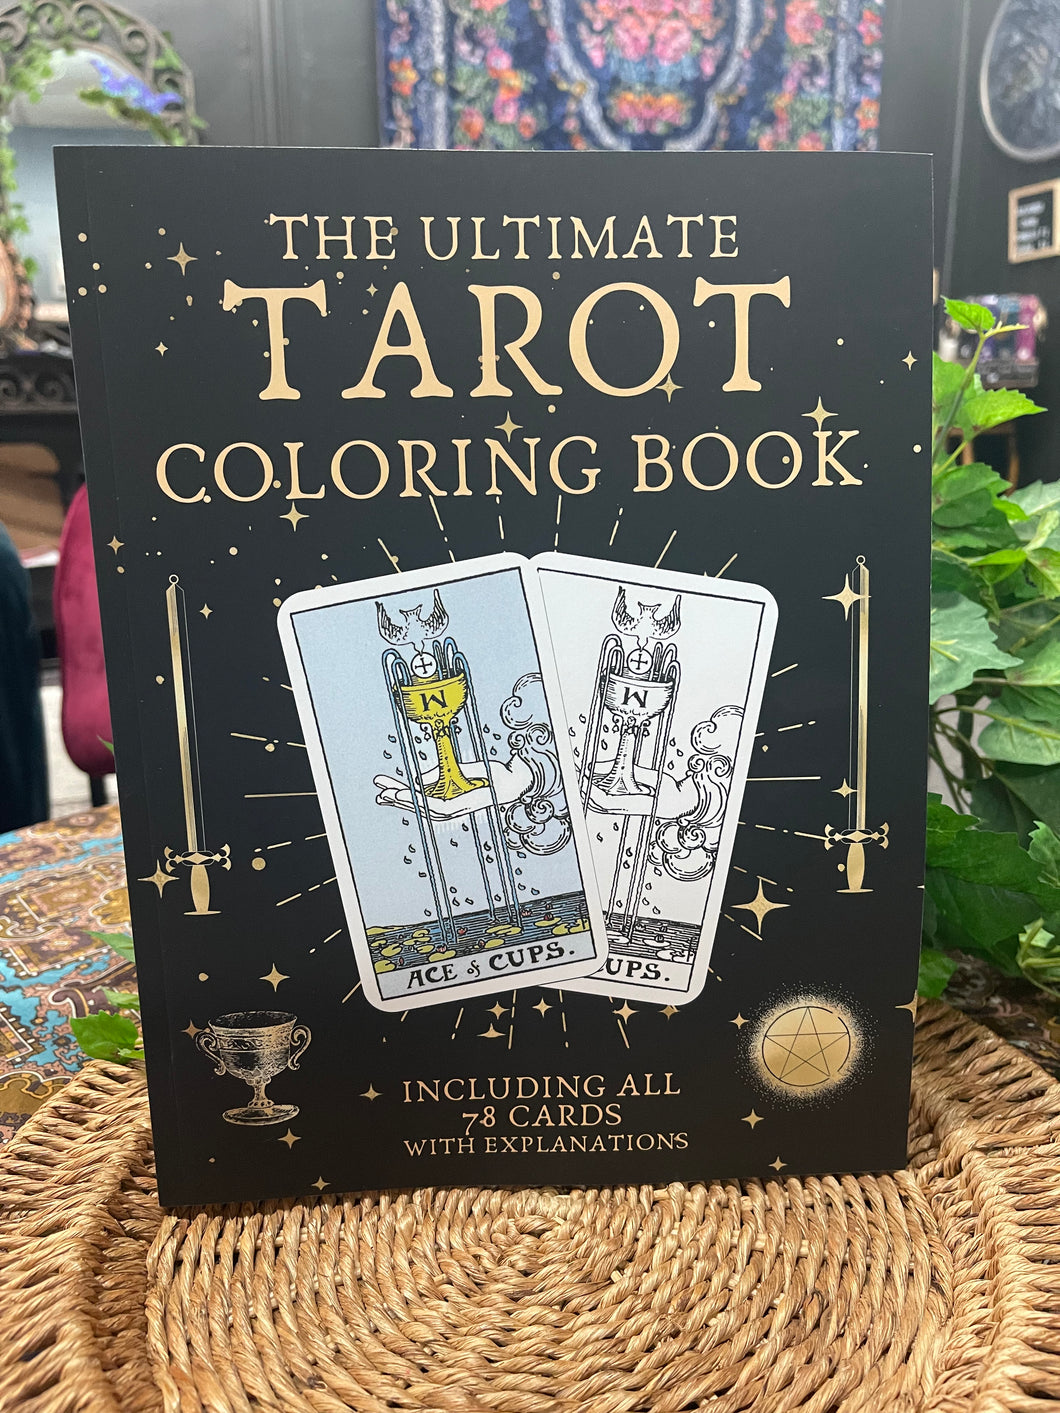 The Ultimate Tarot Coloring Book